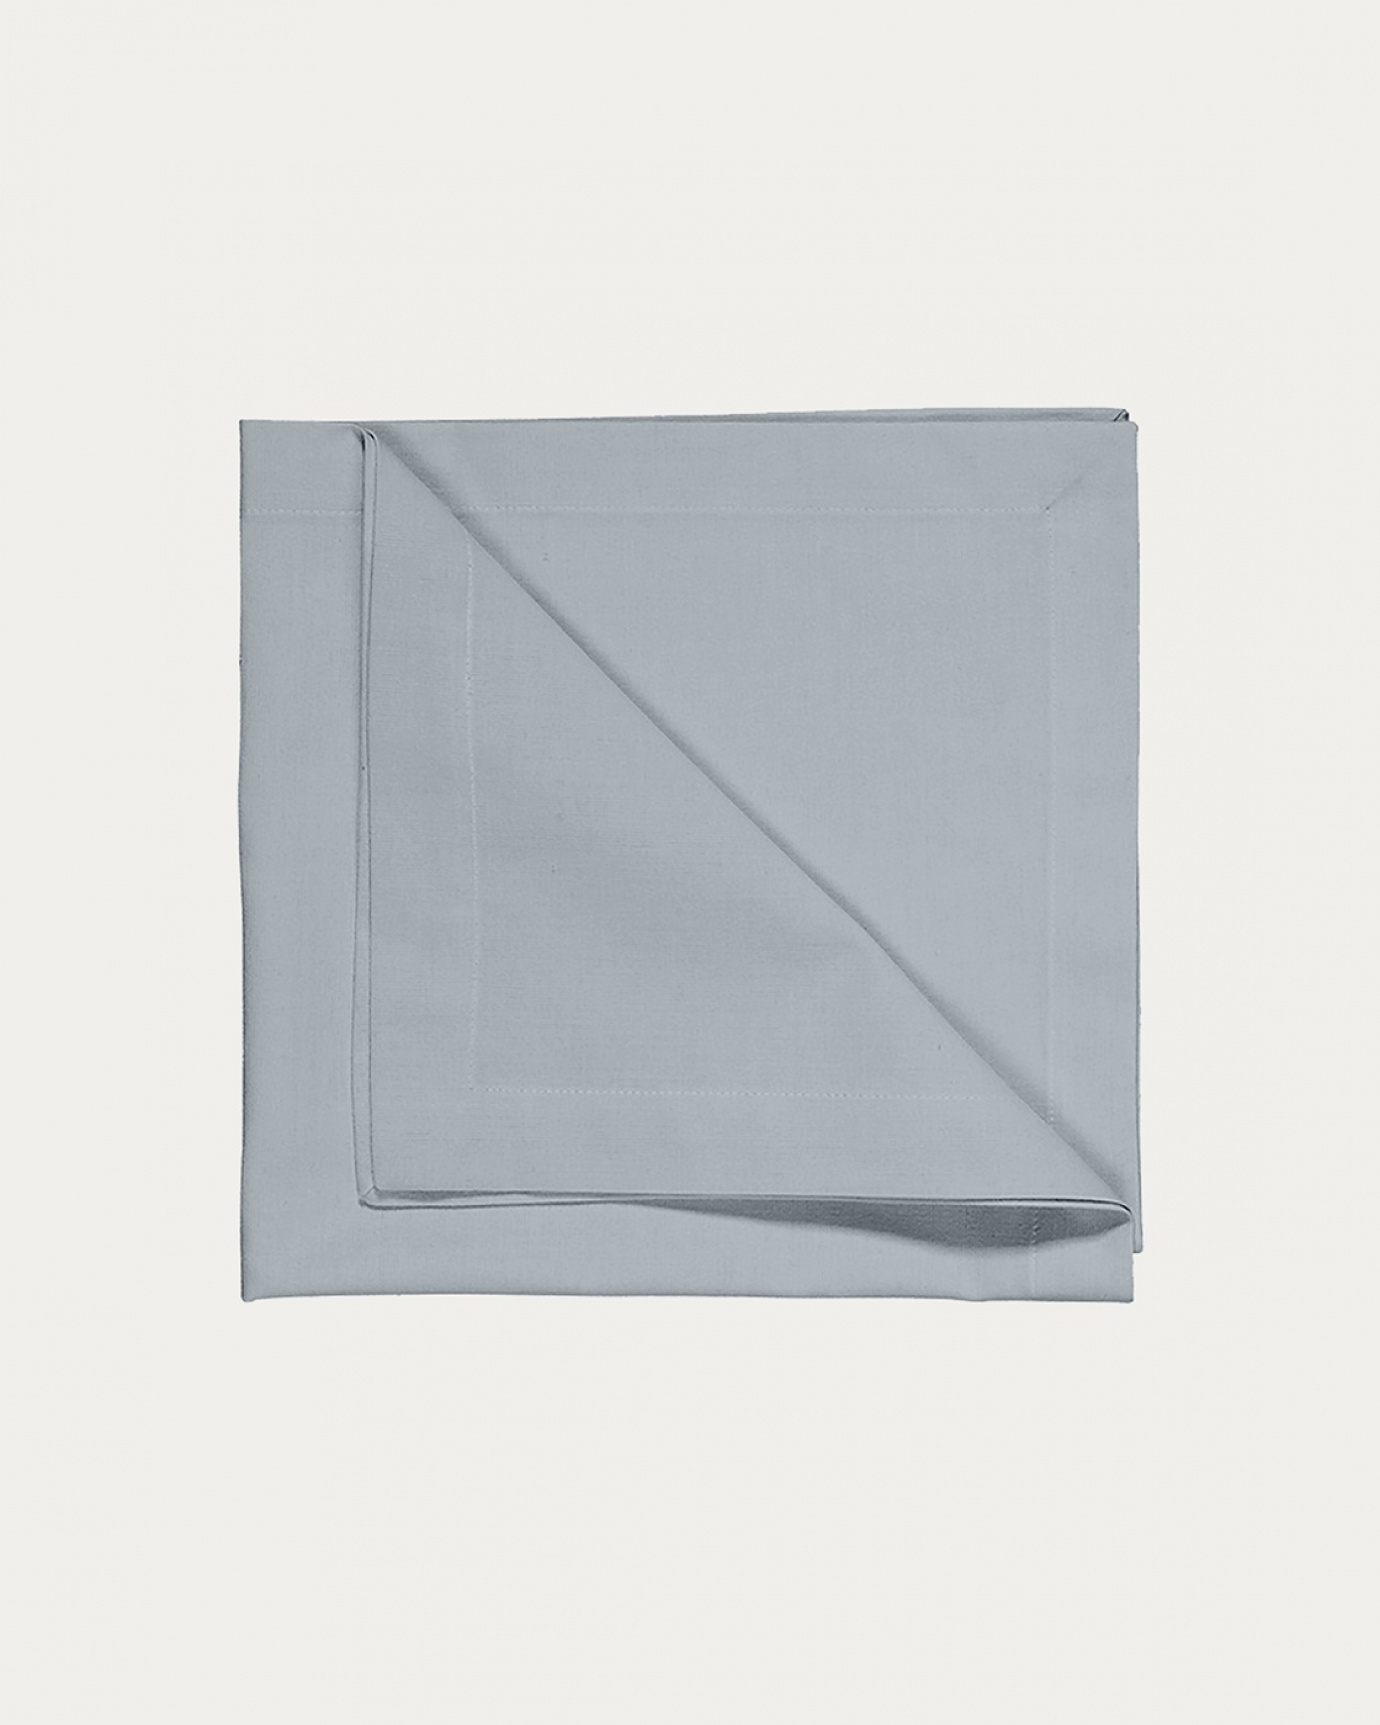 Product image light grey blue ROBERT napkin made of soft cotton from LINUM DESIGN. Size 45x45 cm and sold in 4-pack.